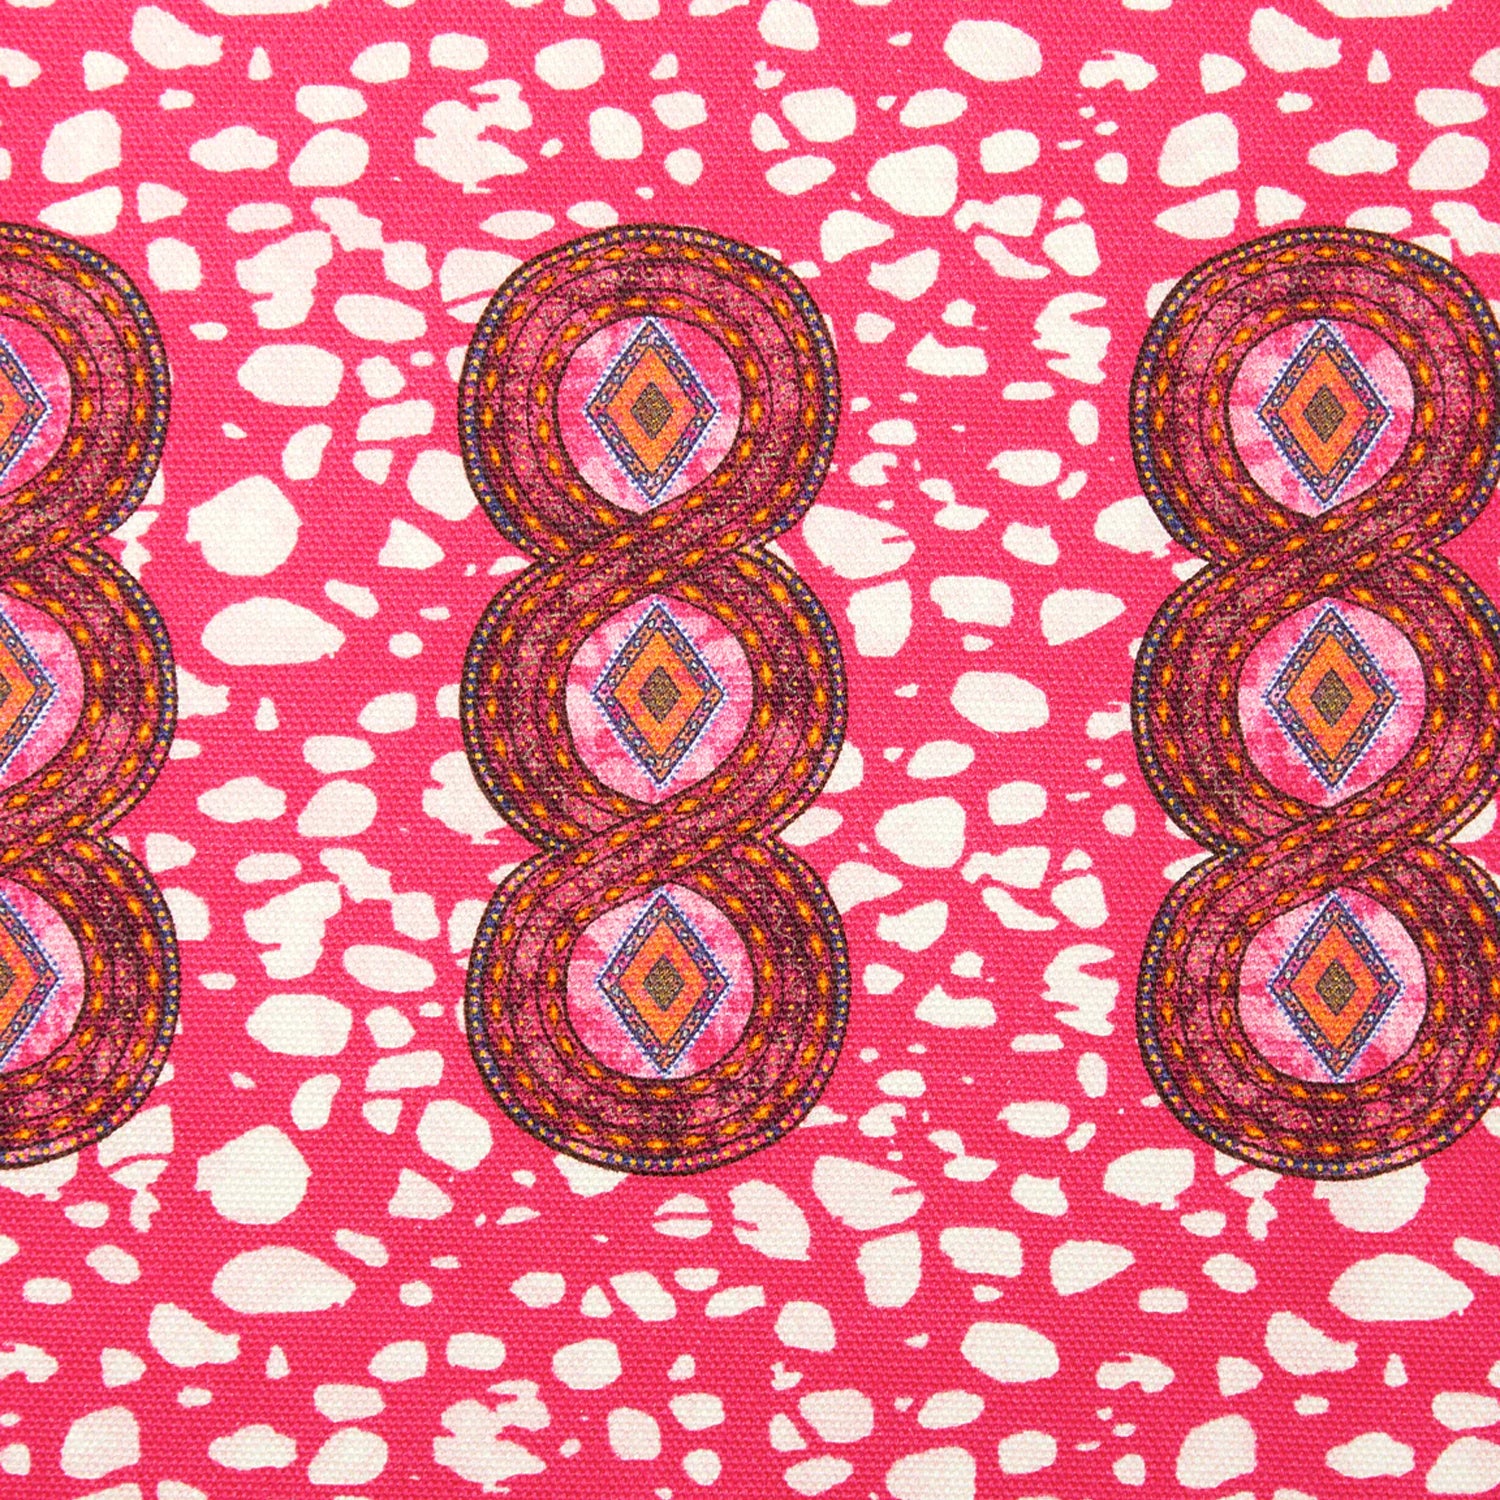 Detail of fabric in an intricate curvilinear print in shades of red, orange and pink.